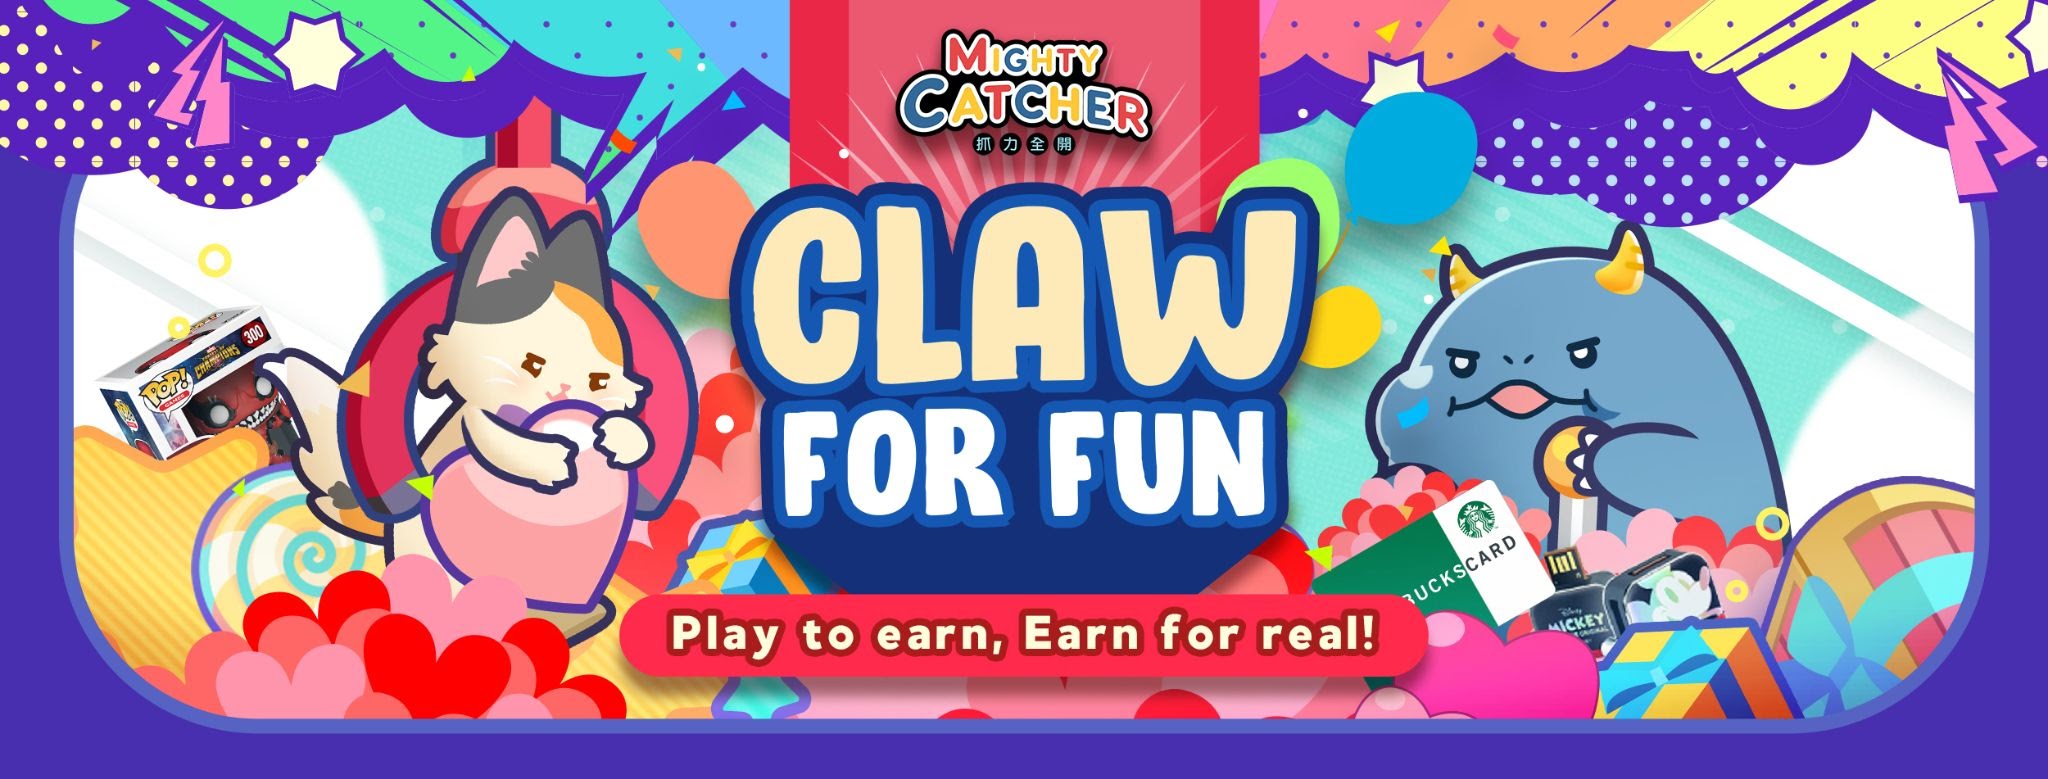 Play-to-earn game Mighty Catcher with real and NFT prizes now in the PH